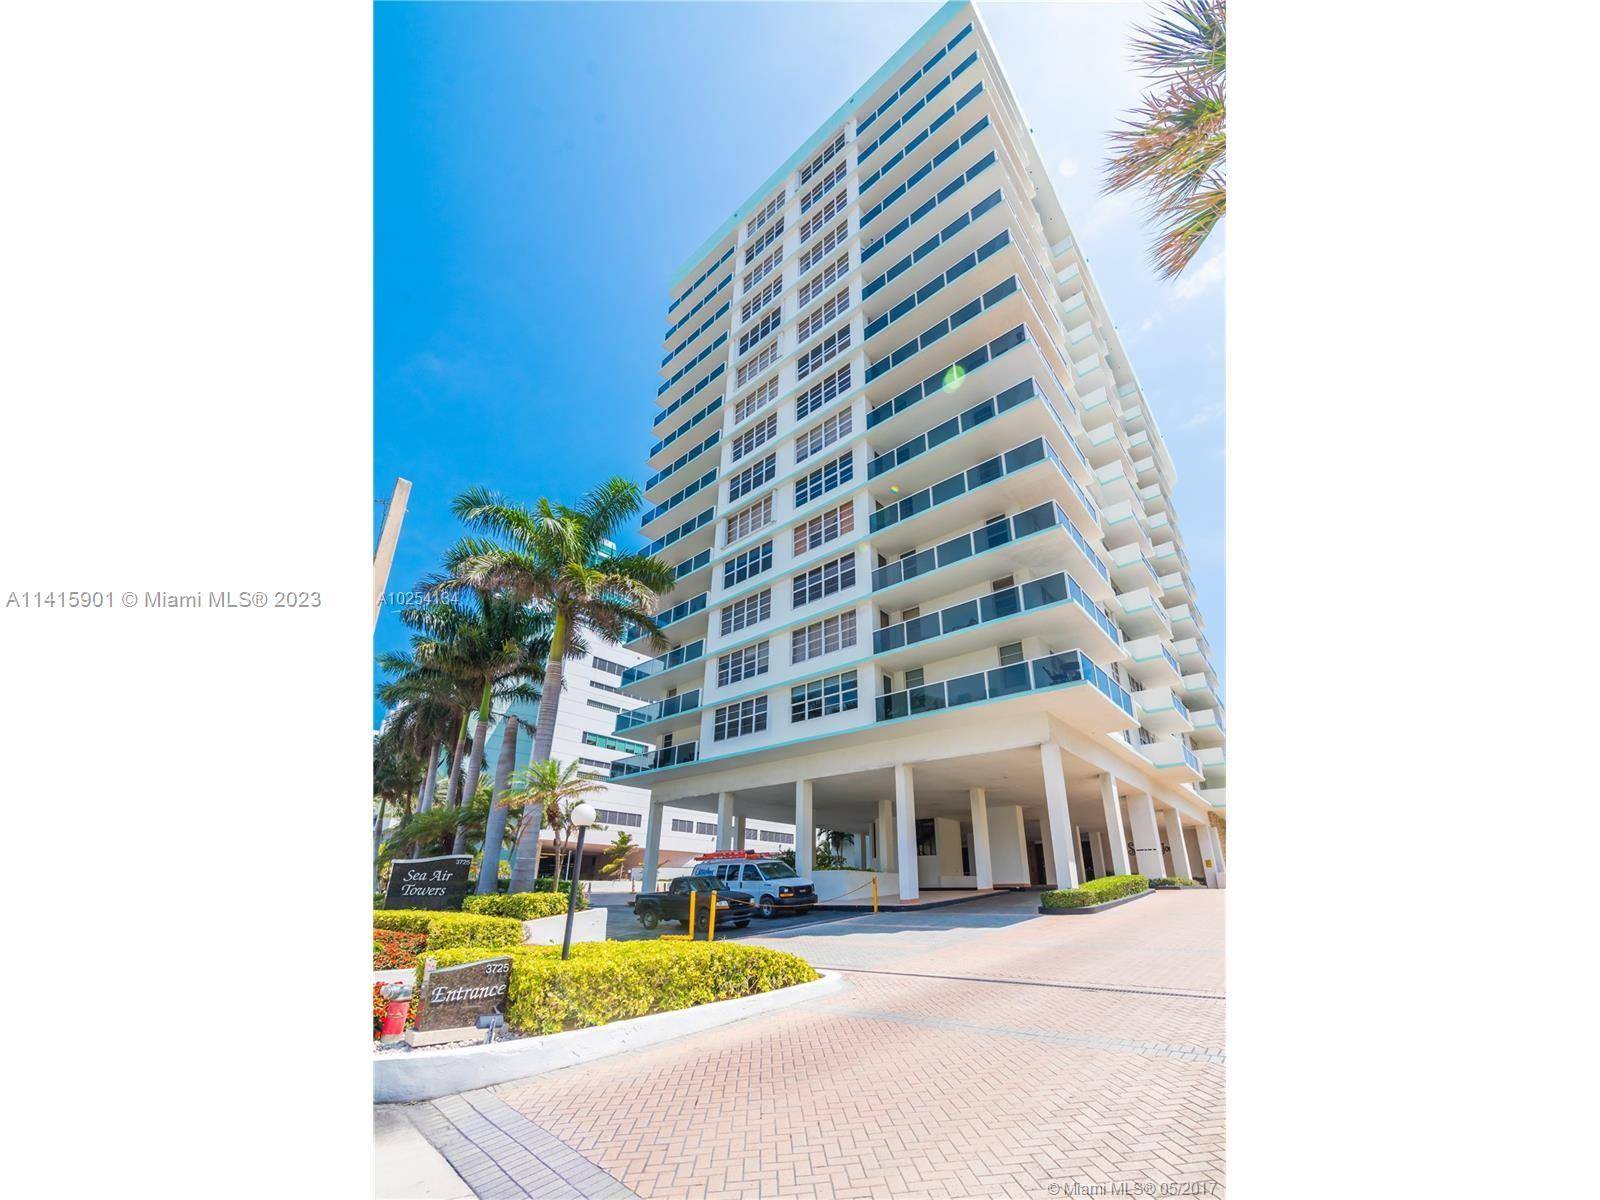 Available Now. 1 1. 5 Bedroom Condominium right on the beach in a beautiful well maintained building, located close to shopping, the Hollywood Boardwalk, and right next to the famous ...